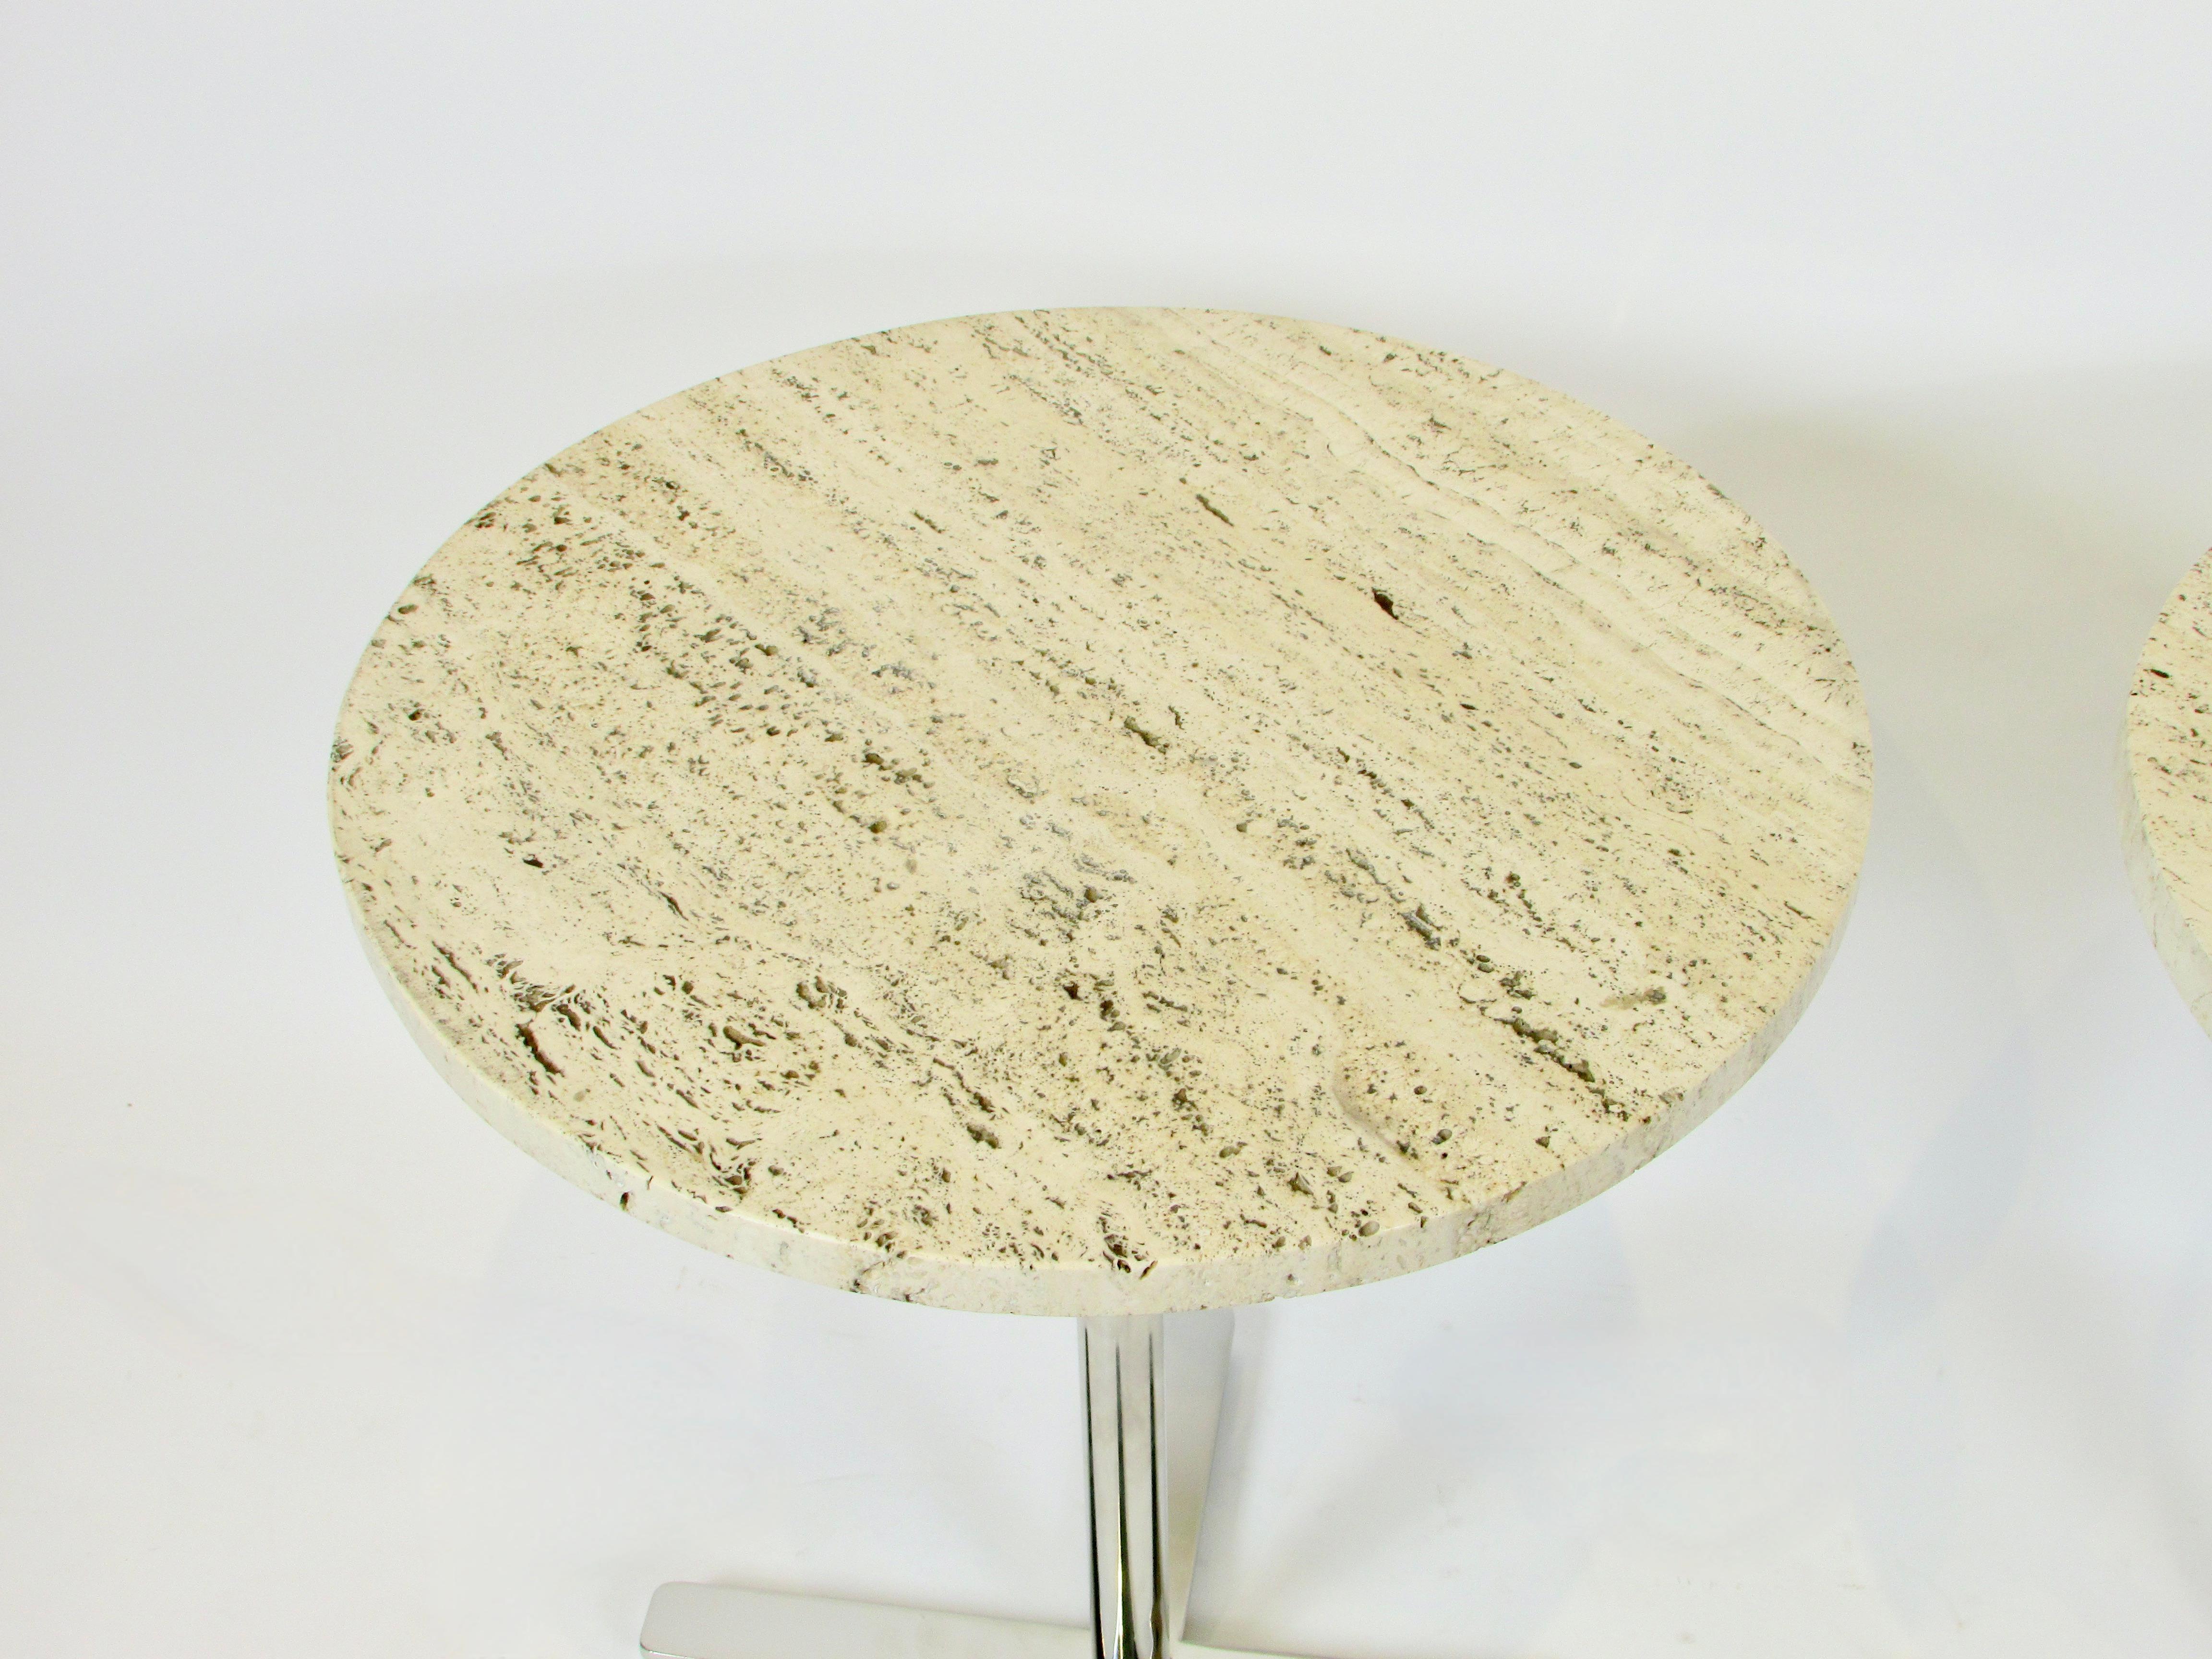 Pair of Helikon Open Grain Travertine Marble on Stainless Steel Base Tables In Good Condition For Sale In Ferndale, MI